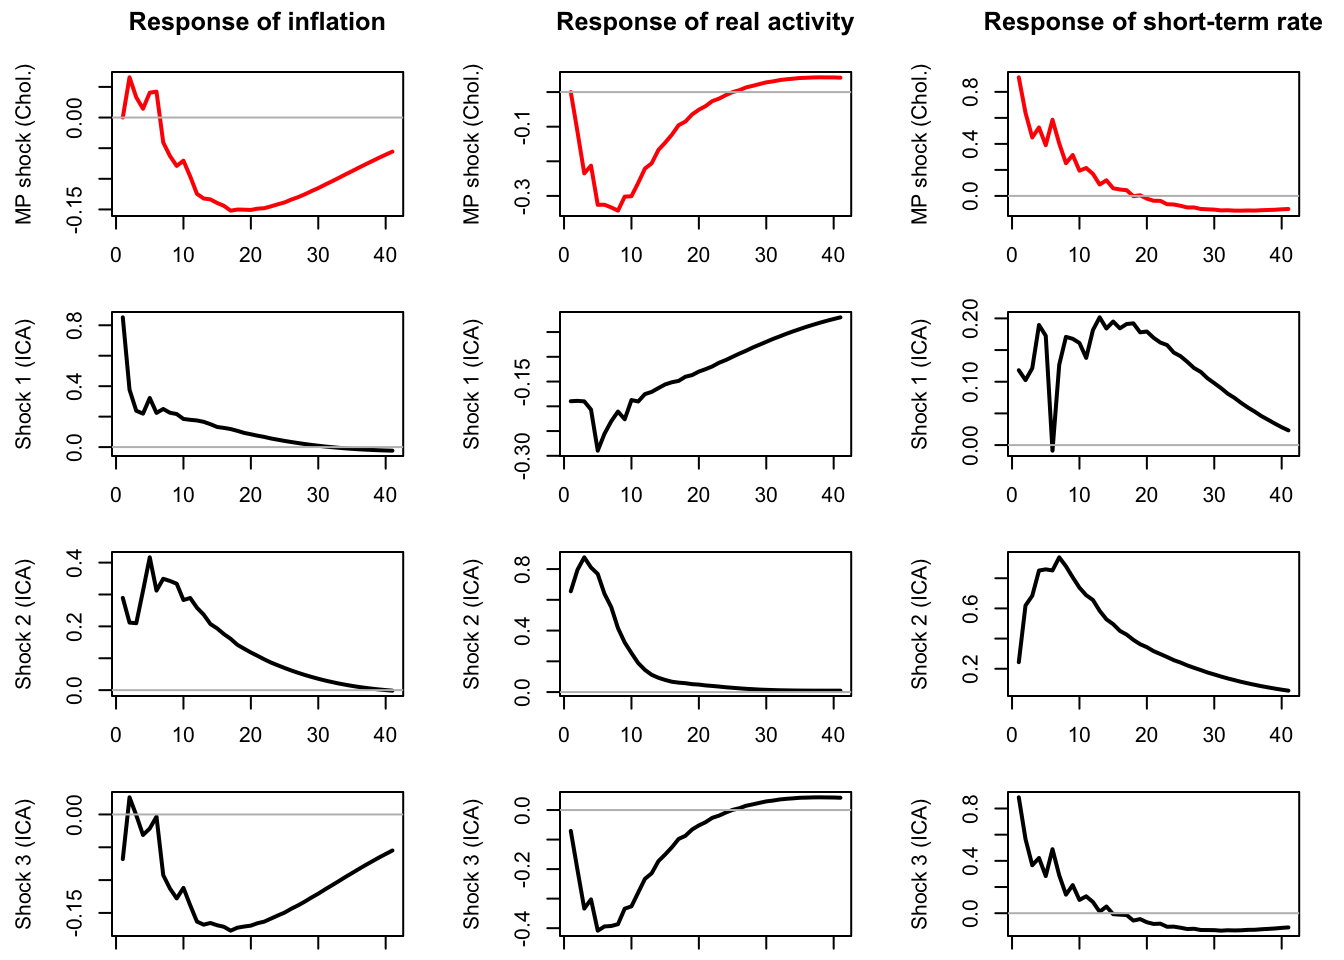 The first row of plots shows the responses of the three endogenous variables to the monetary policy shock in the context of a Cholesky-idendtified SVAR (ordering: inflation, output gap, interest rate). The next three rows of plots show the repsonses of the endogenous variables to the three structural shocks identified by ICA. The last one (Shock 3) is close to the Cholesky-identified monetary policy shock.